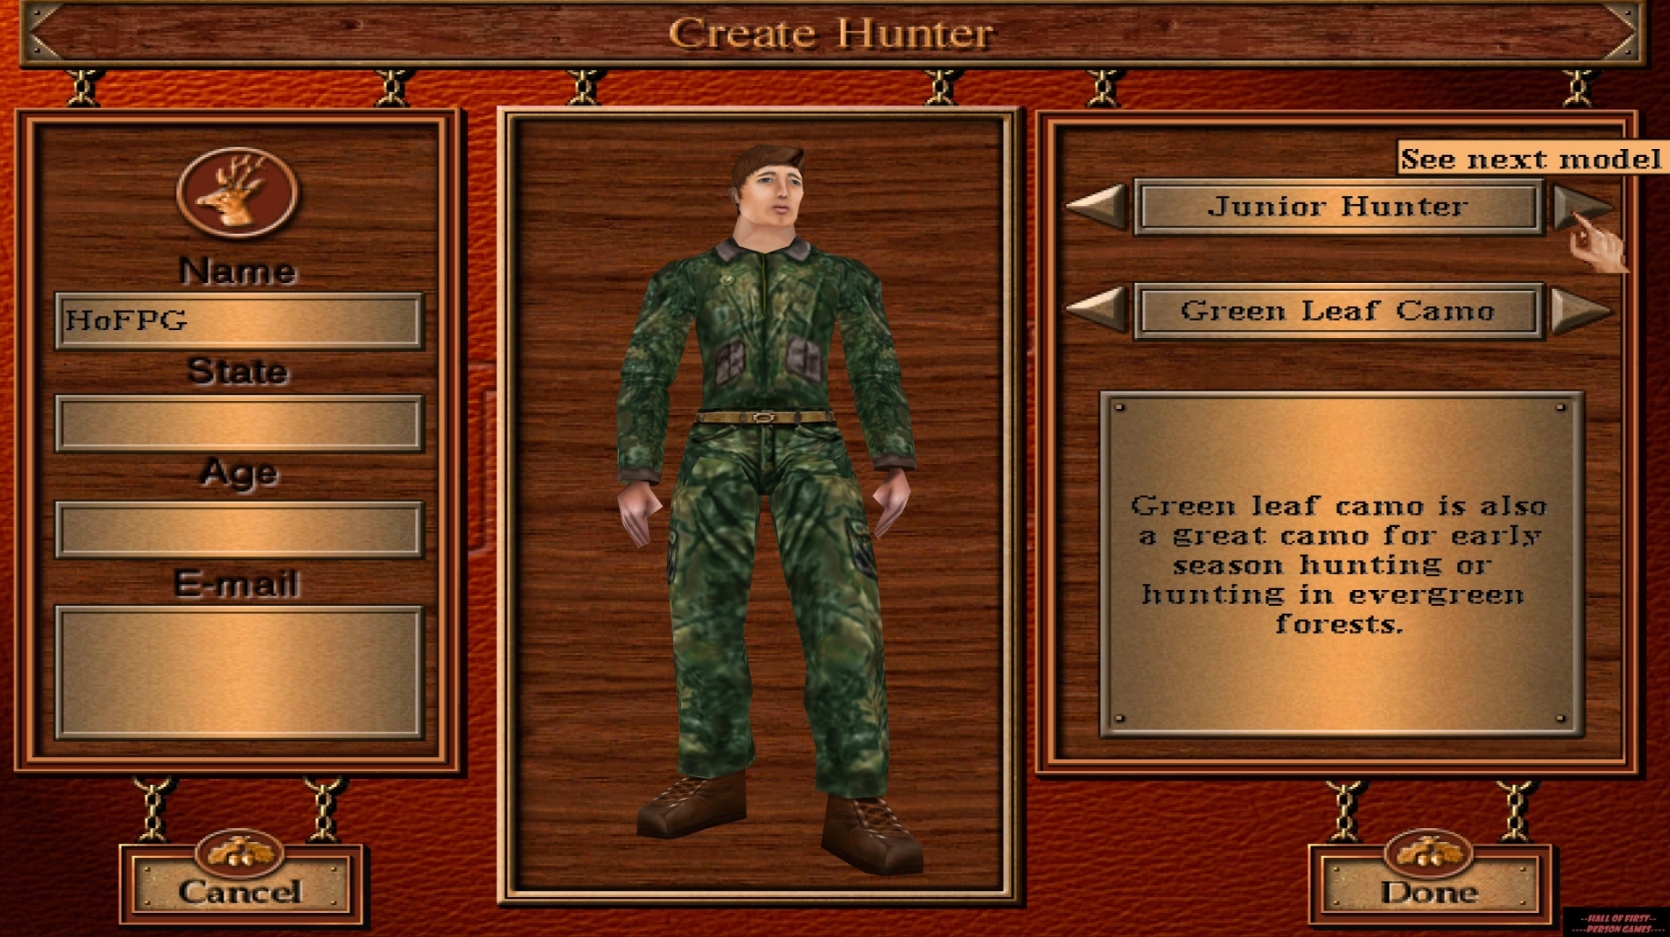 rocky mountain trophy hunter game